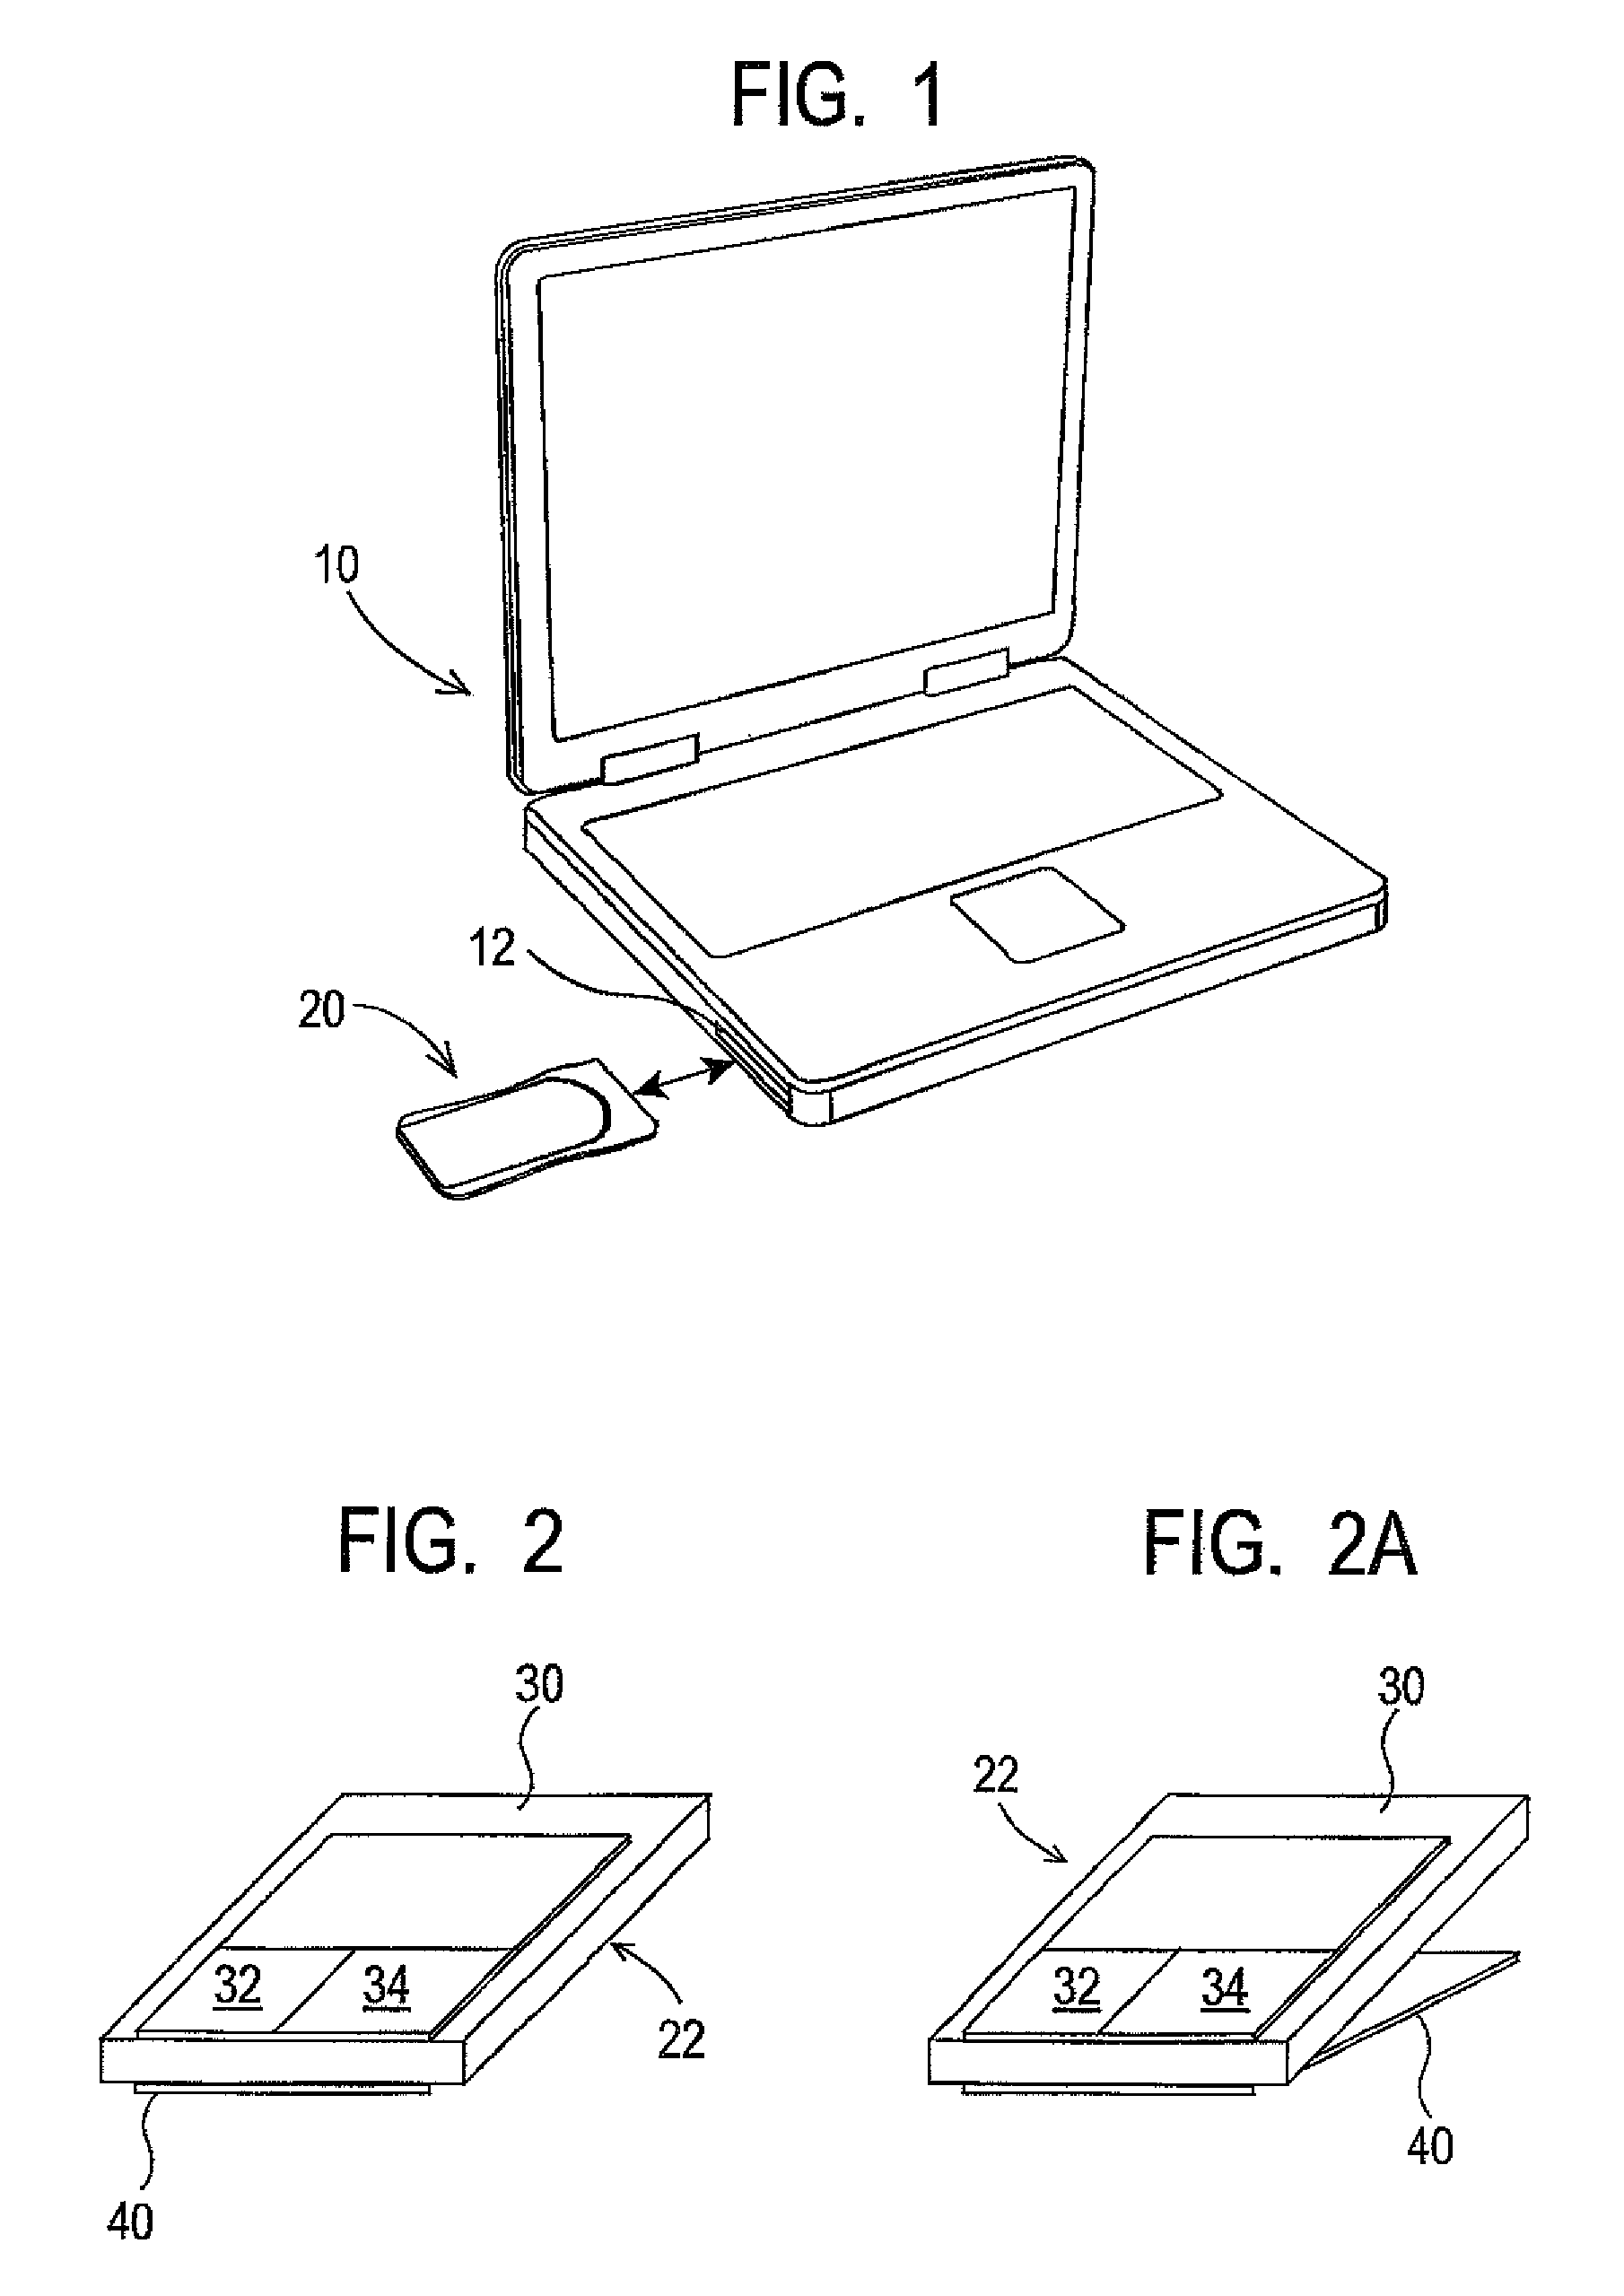 Peripheral devices for portable computer